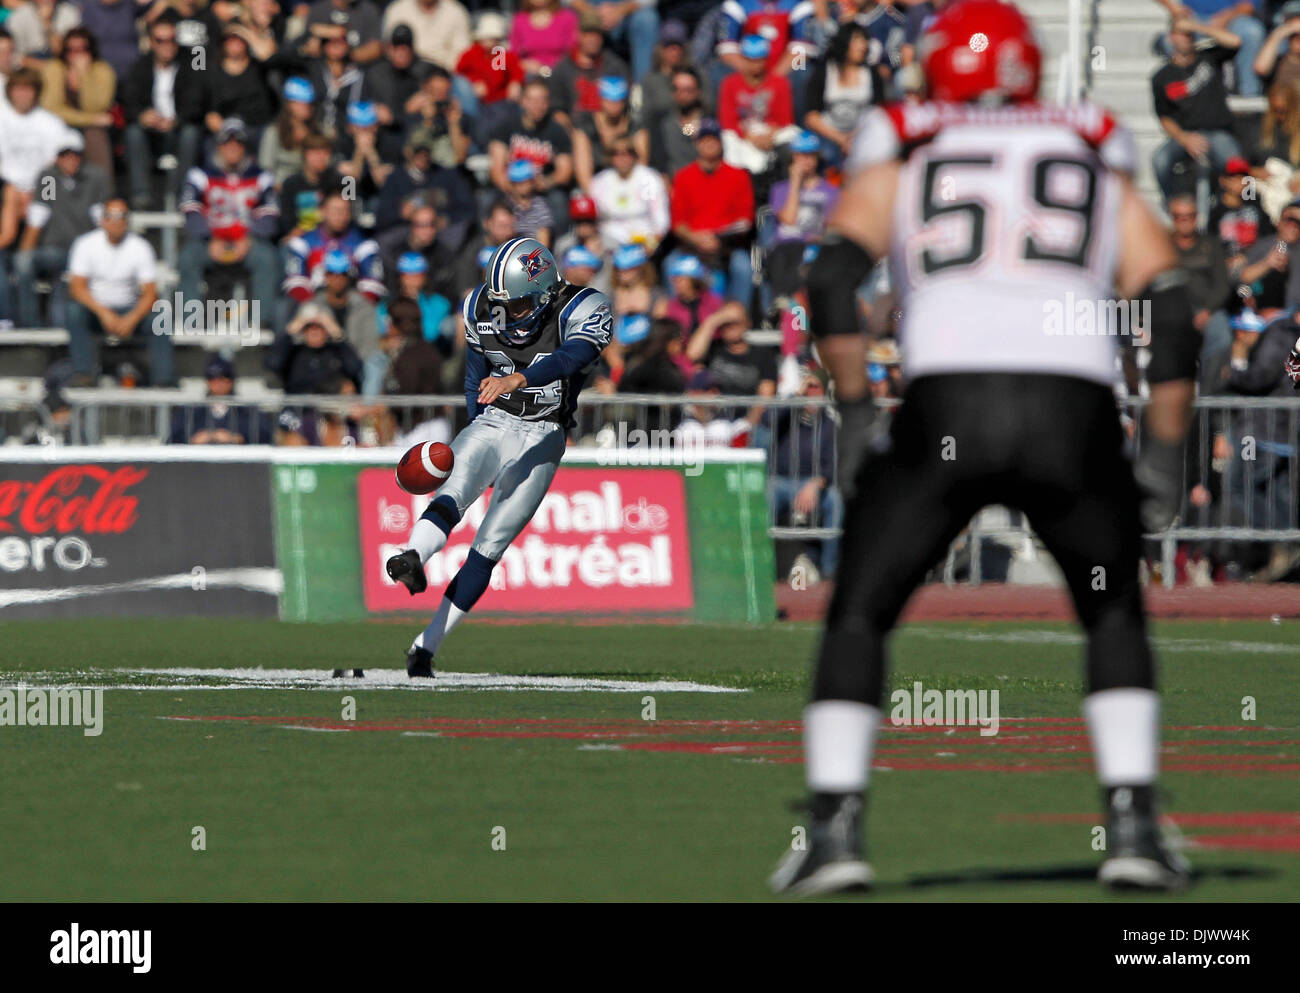 Oct. 11, 2010 - Montreal, Quebec, Canada - Montreal Alouettes' punter/kicker Colt David (#24) punts under the watchfull eye of Calgary Stampeders' offensive lineman Steve Myddelton (#59) during the CFL game between the Calgary Stampeders and the Montreal Alouettes at Percival-Molson Stadium. Montreal won 46-19. (Credit Image: © Phillippe Champoux/Southcreek Global/ZUMApress.com) Stock Photo